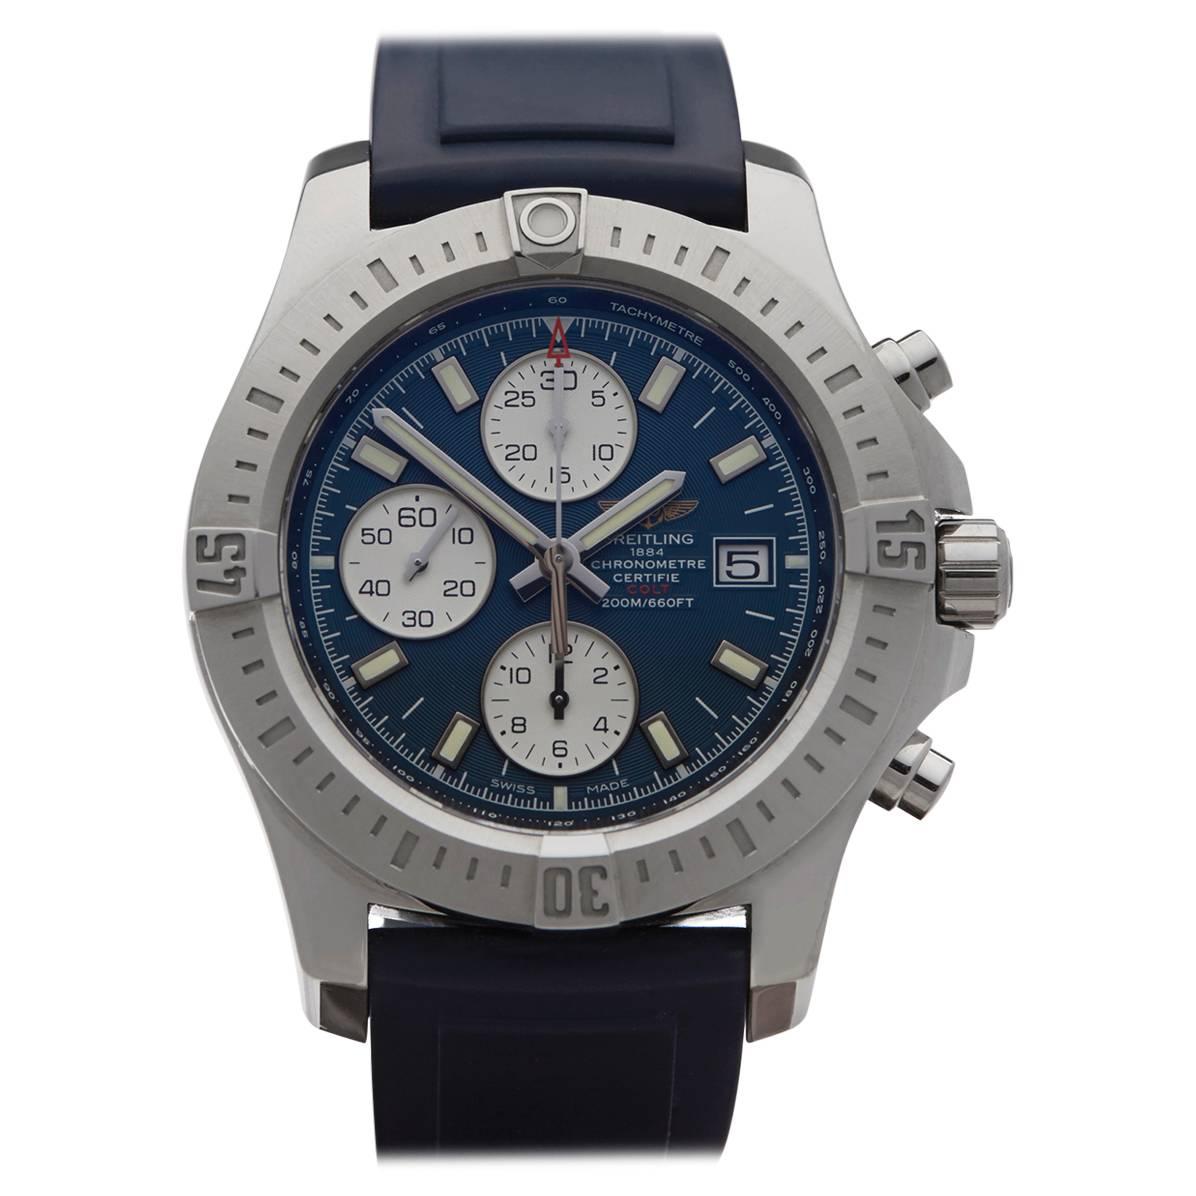 Breitling Colt chronograph gents A1338811/C914 watch